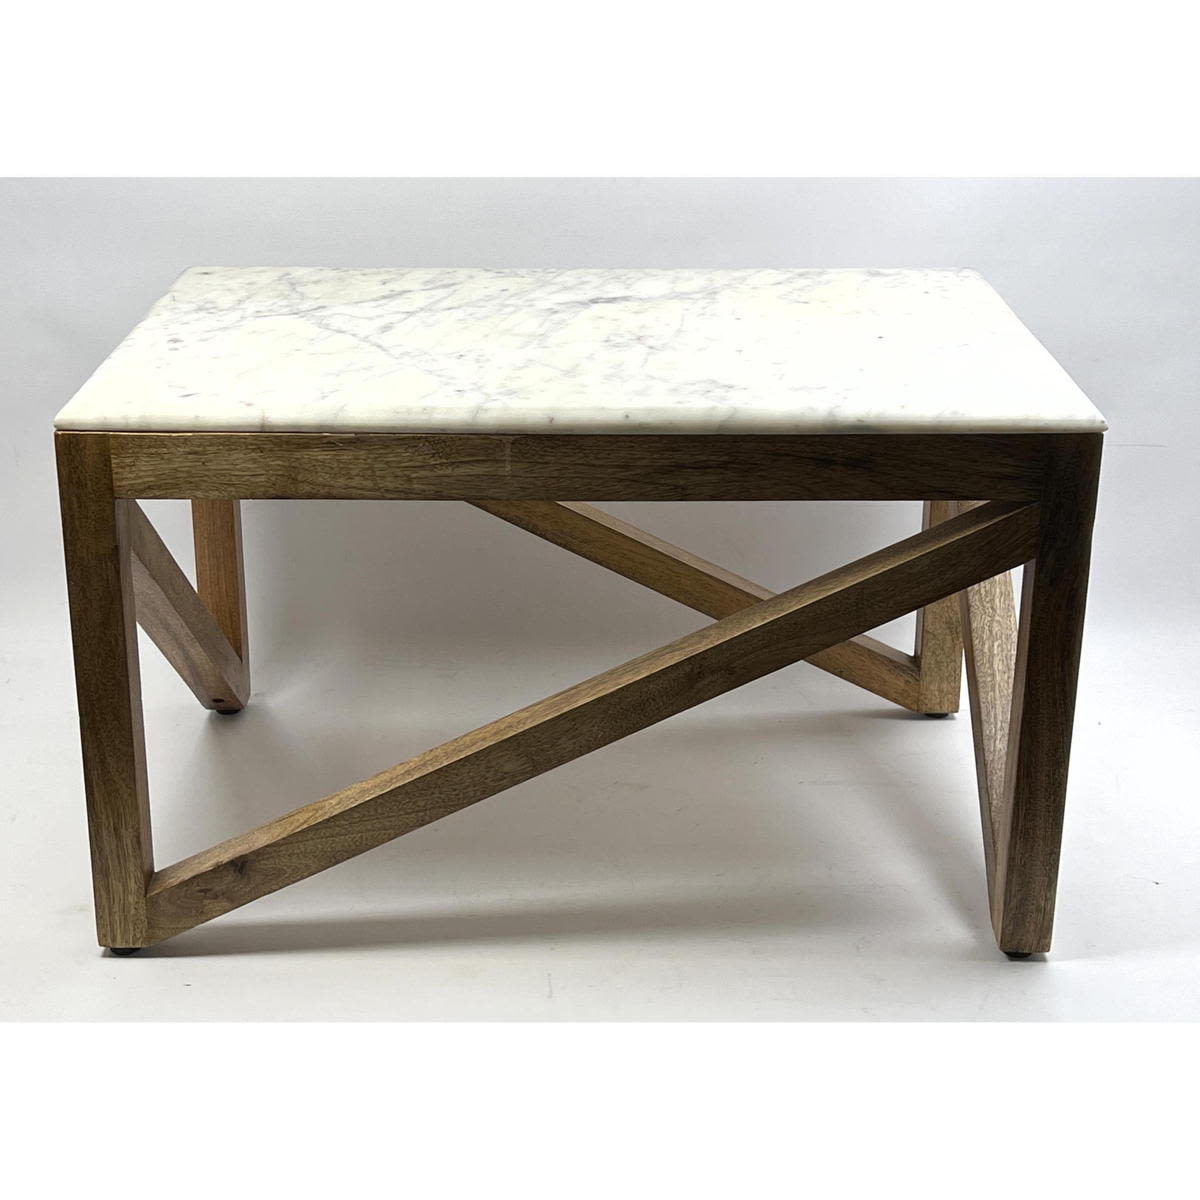 Small Marble Top Table. Cleverly